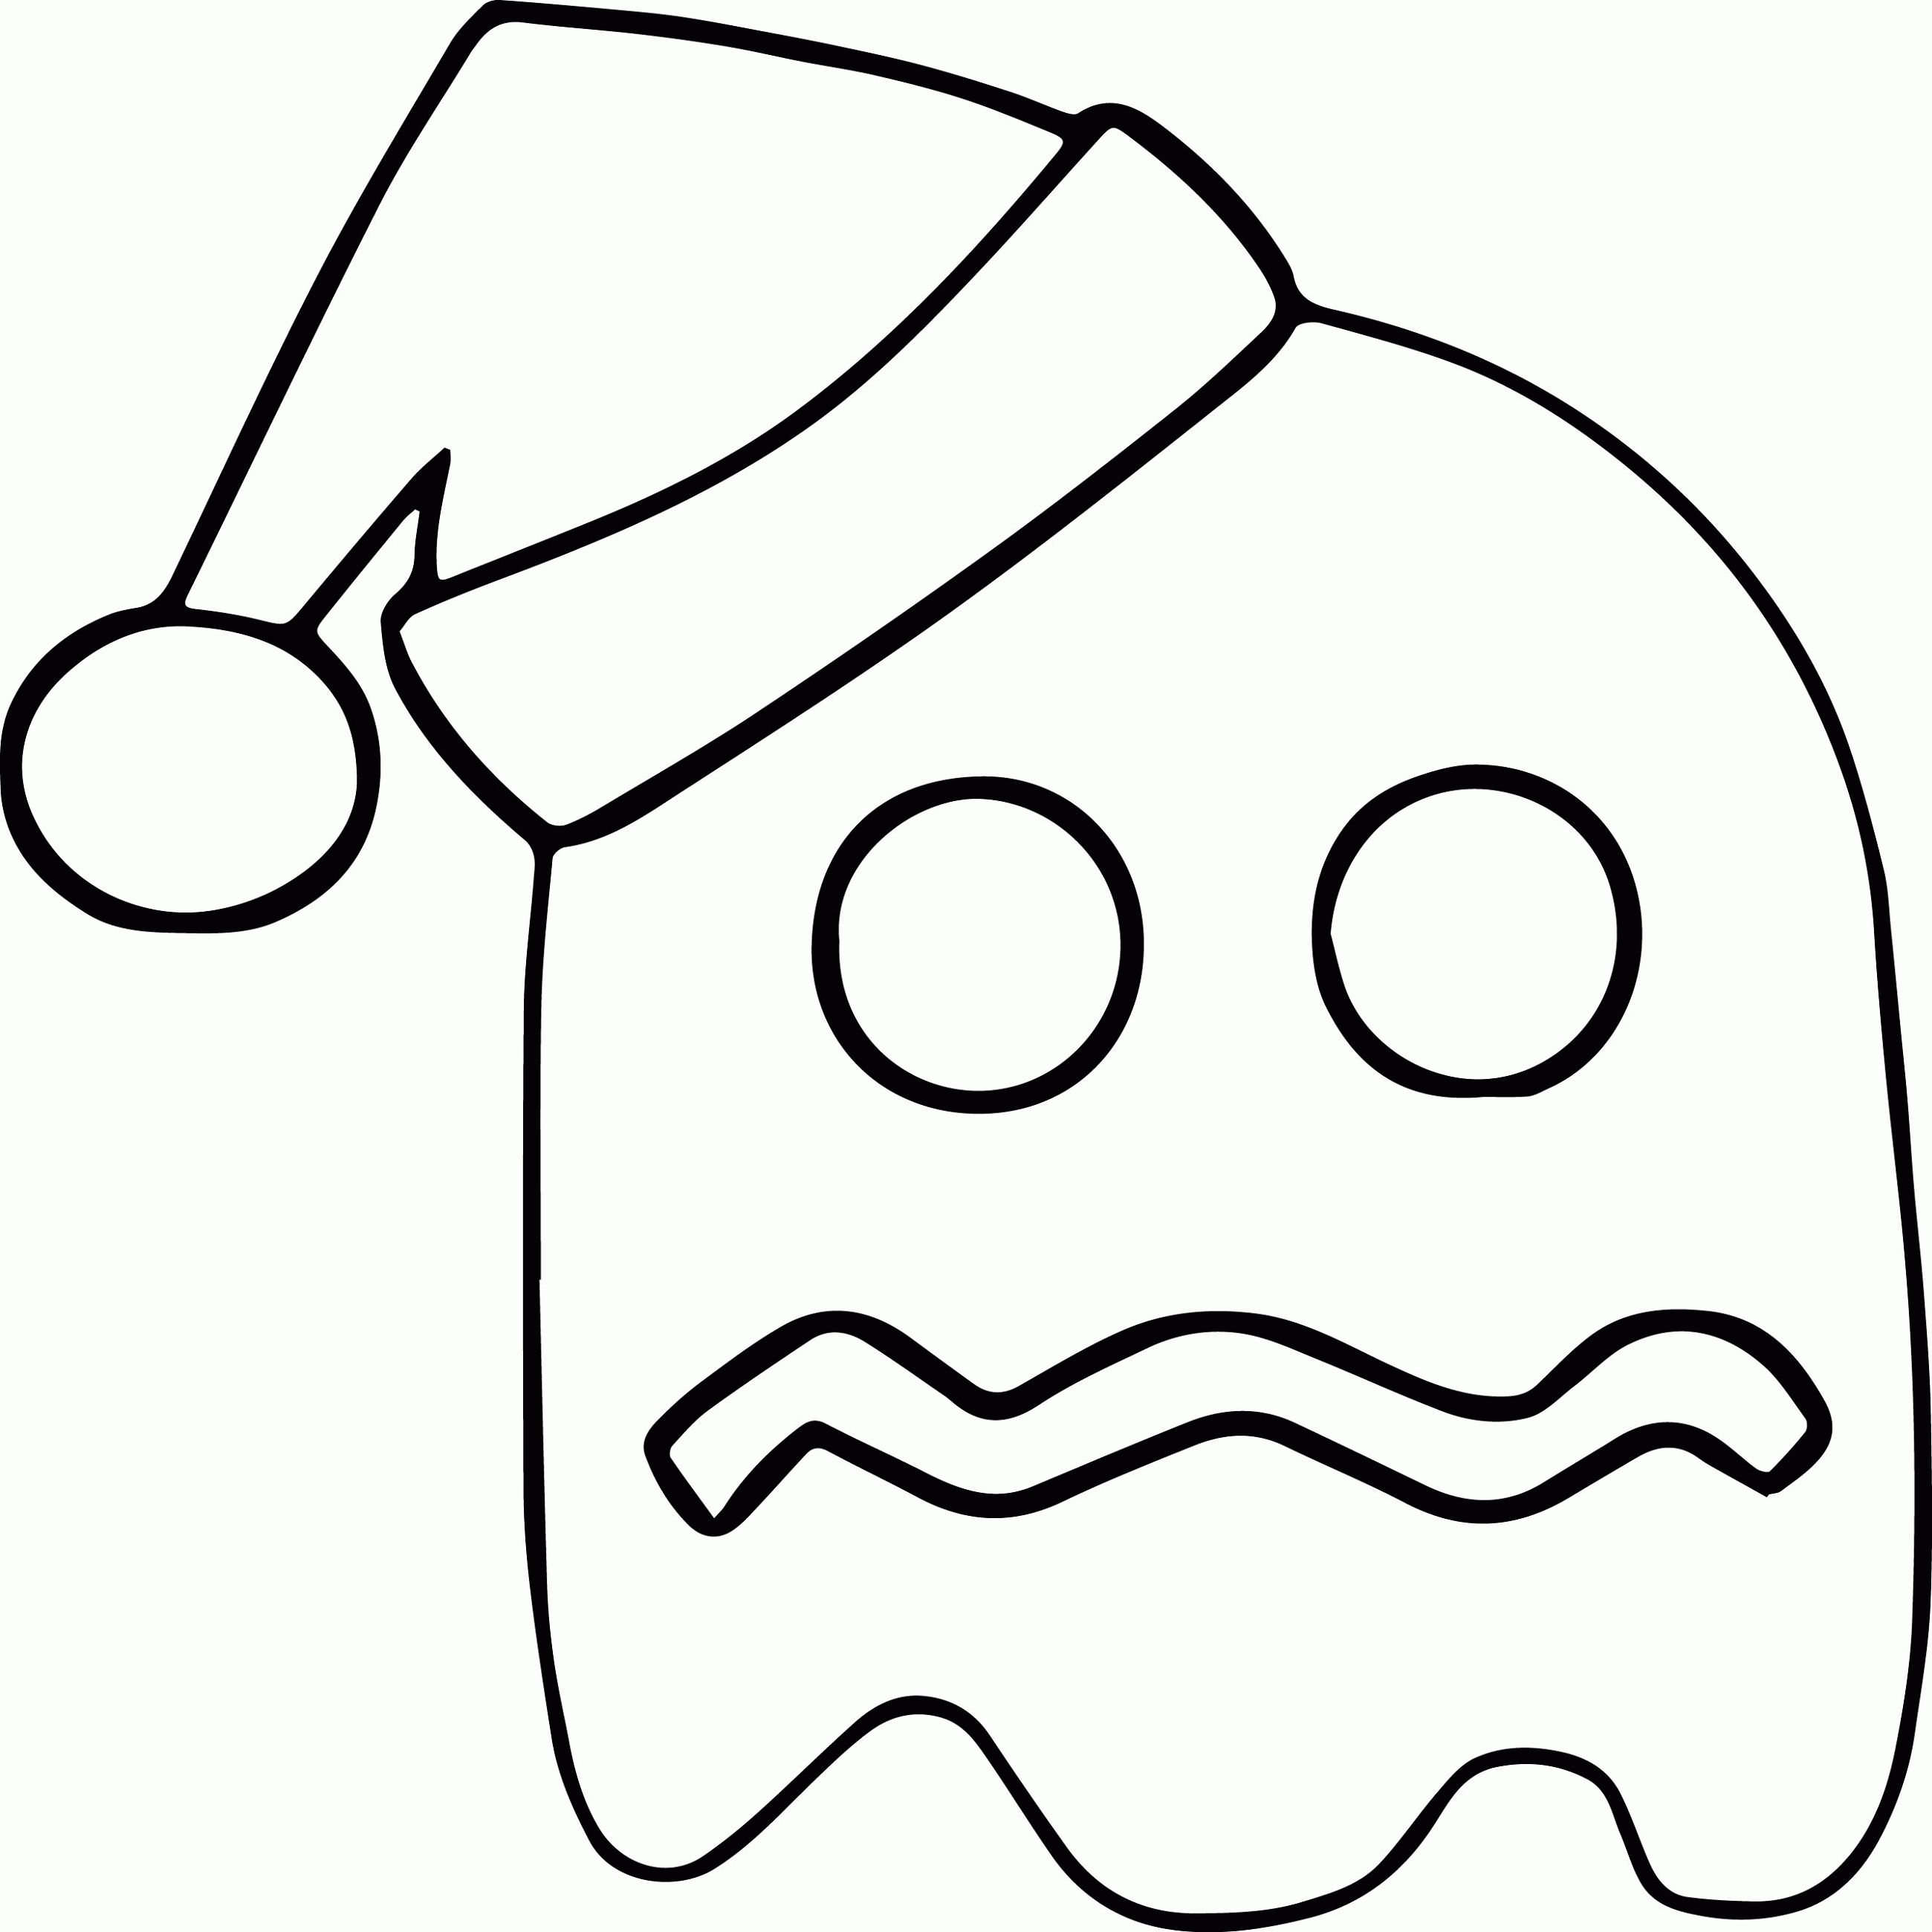 Pacman Coloring Pages Ghostly Adventure